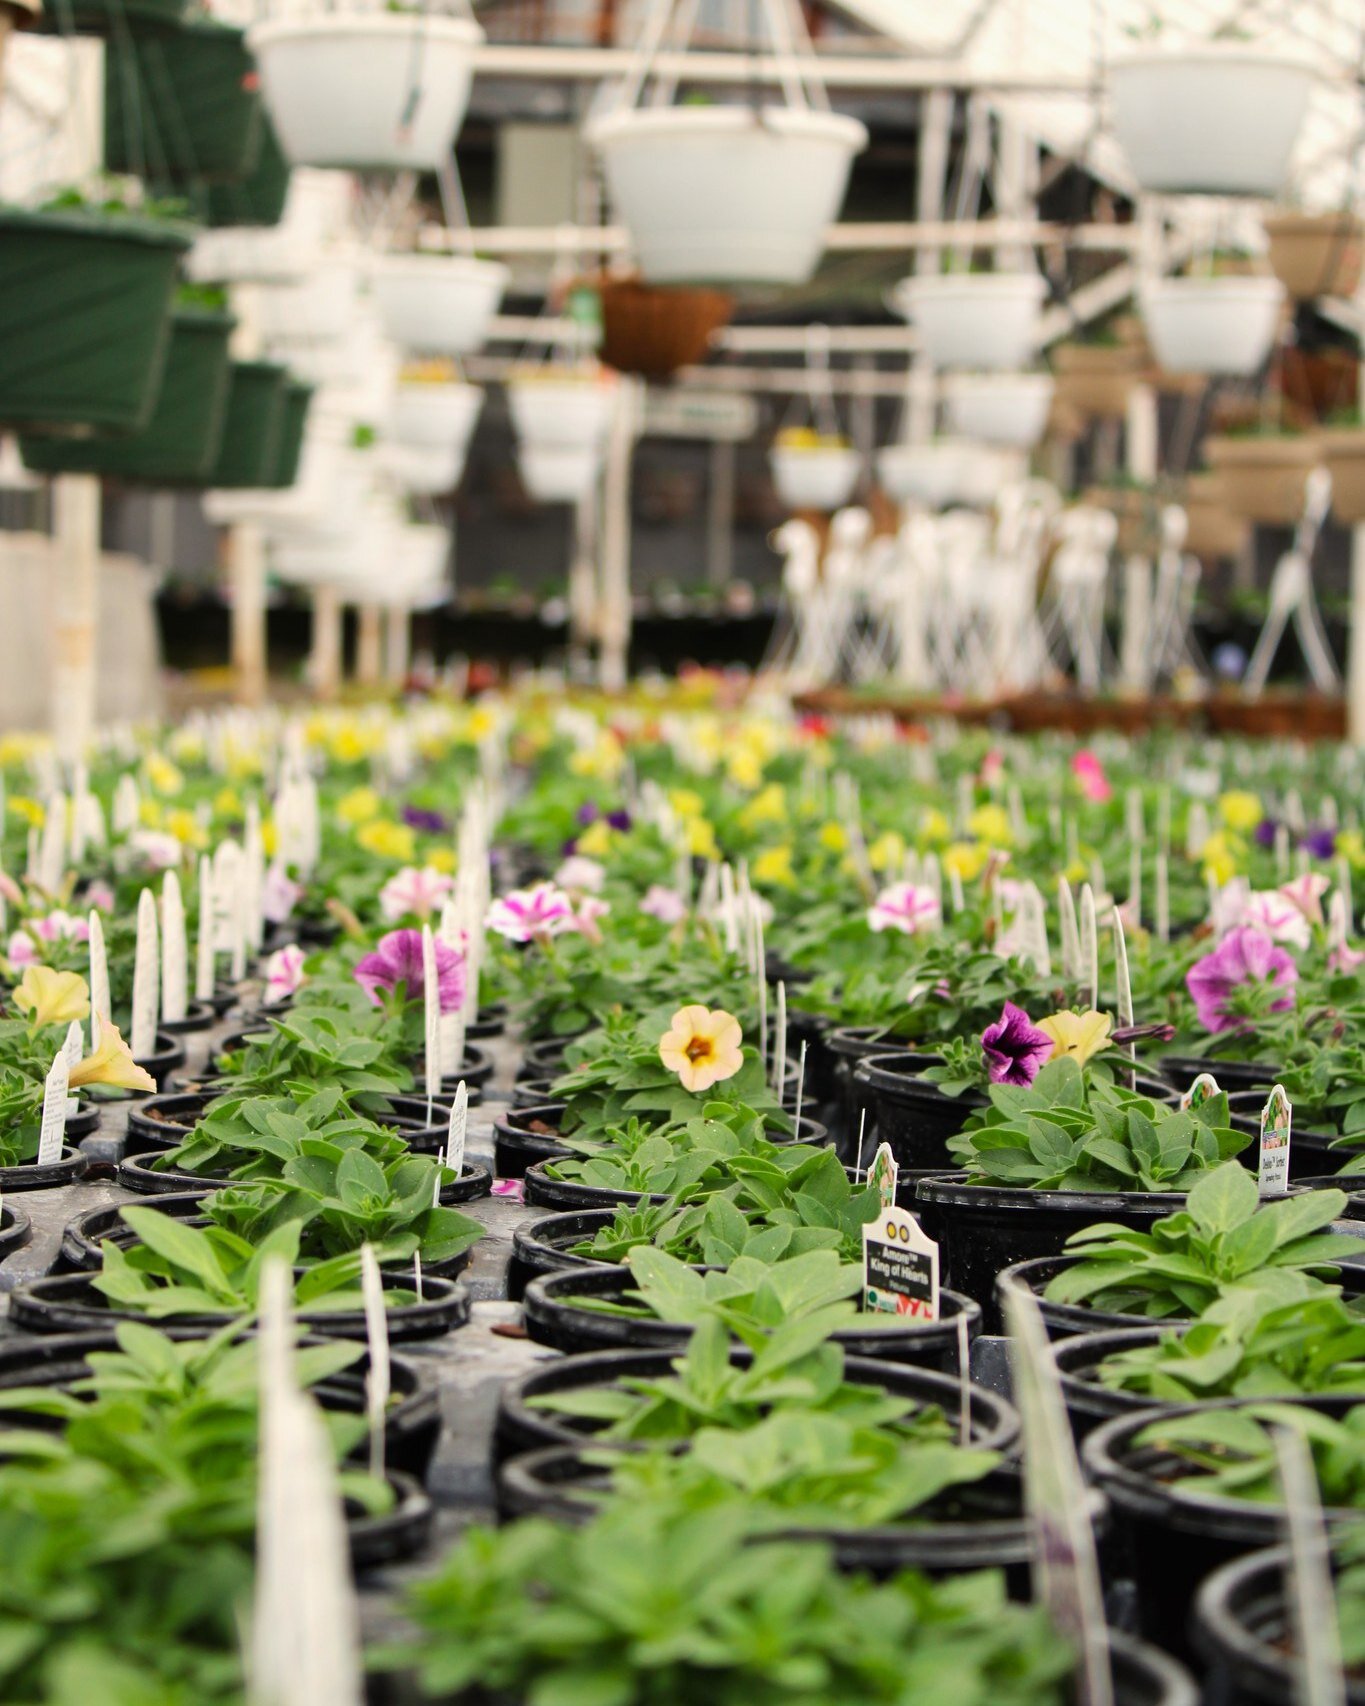 Our glass house is stocked with color right now! 🧠💭 Did you know... you can now access our full list of annuals on our website? Go to https://www.rosecitynursery.com/annuals-2024 to check out the spring selection for the 2024 season! 🌷🪻🌱

#local